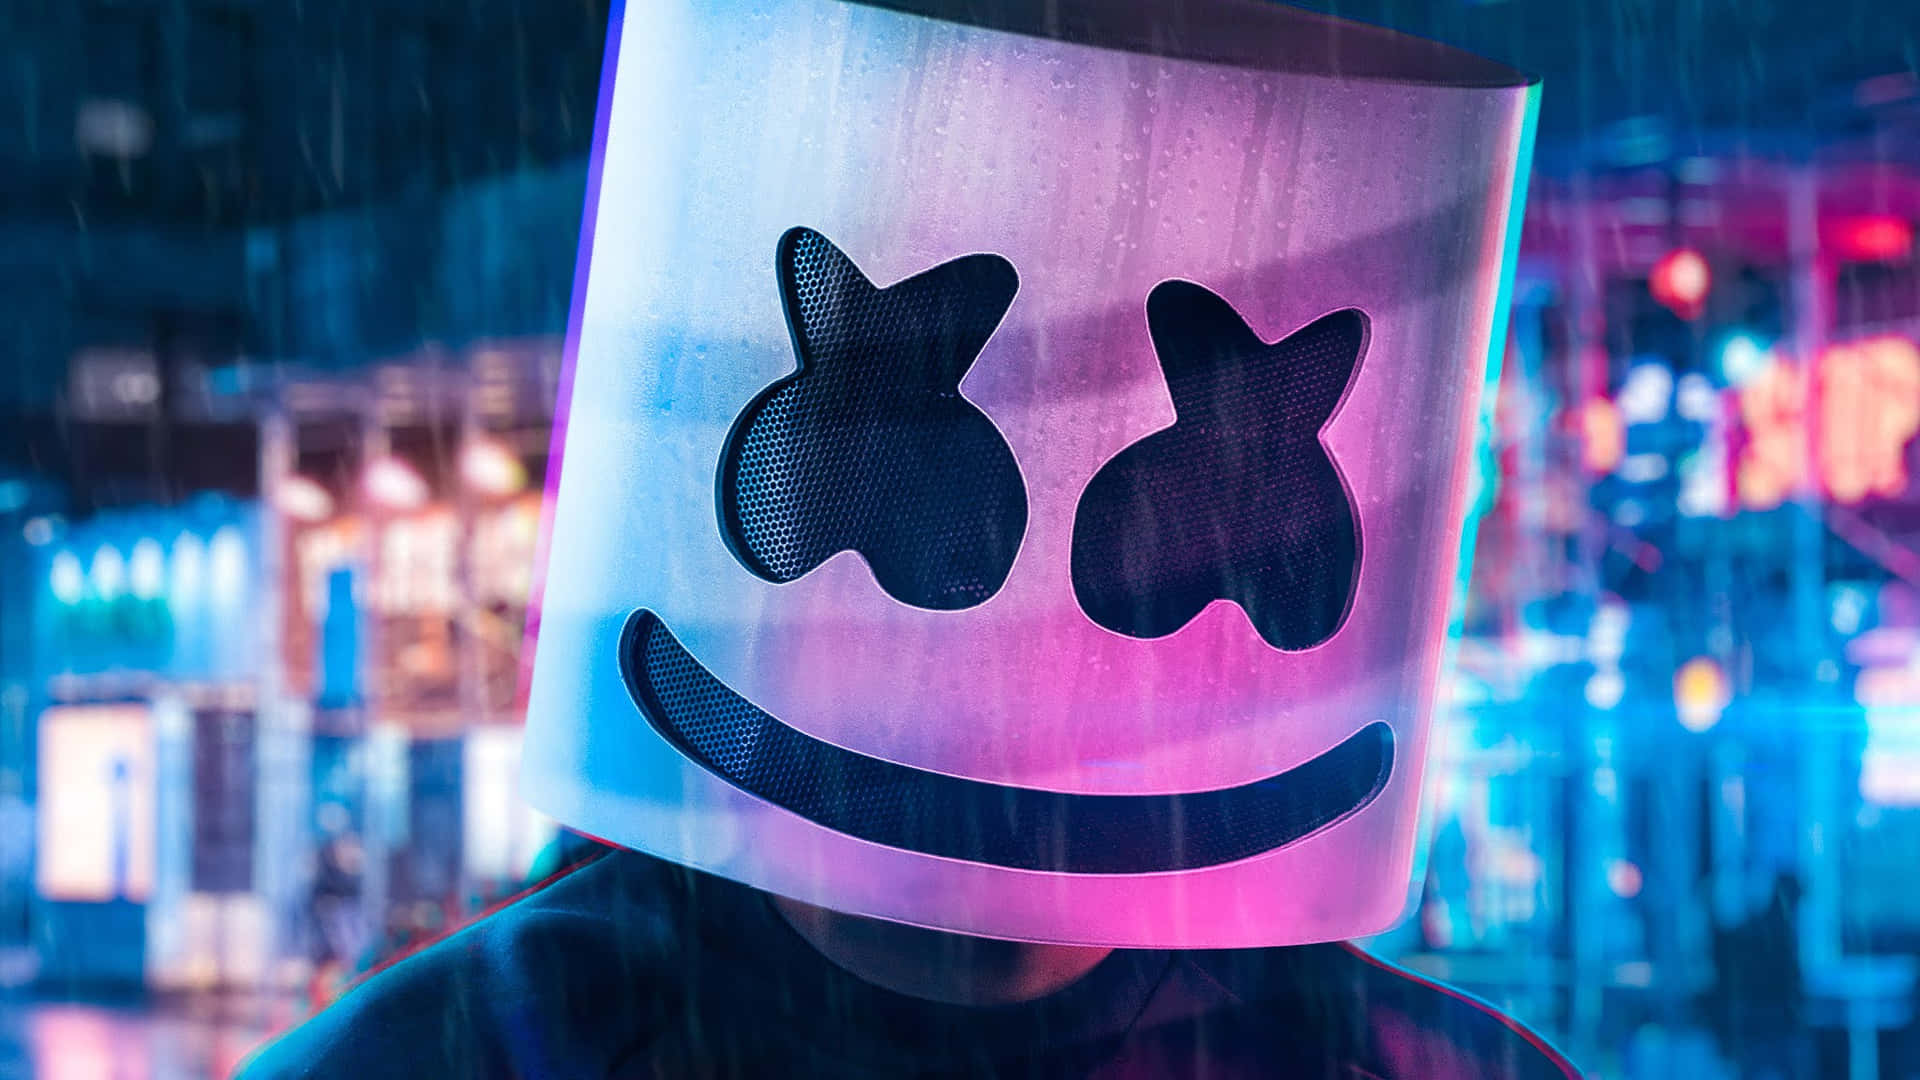 Experience the color and funk of MarshMello's musical melodies